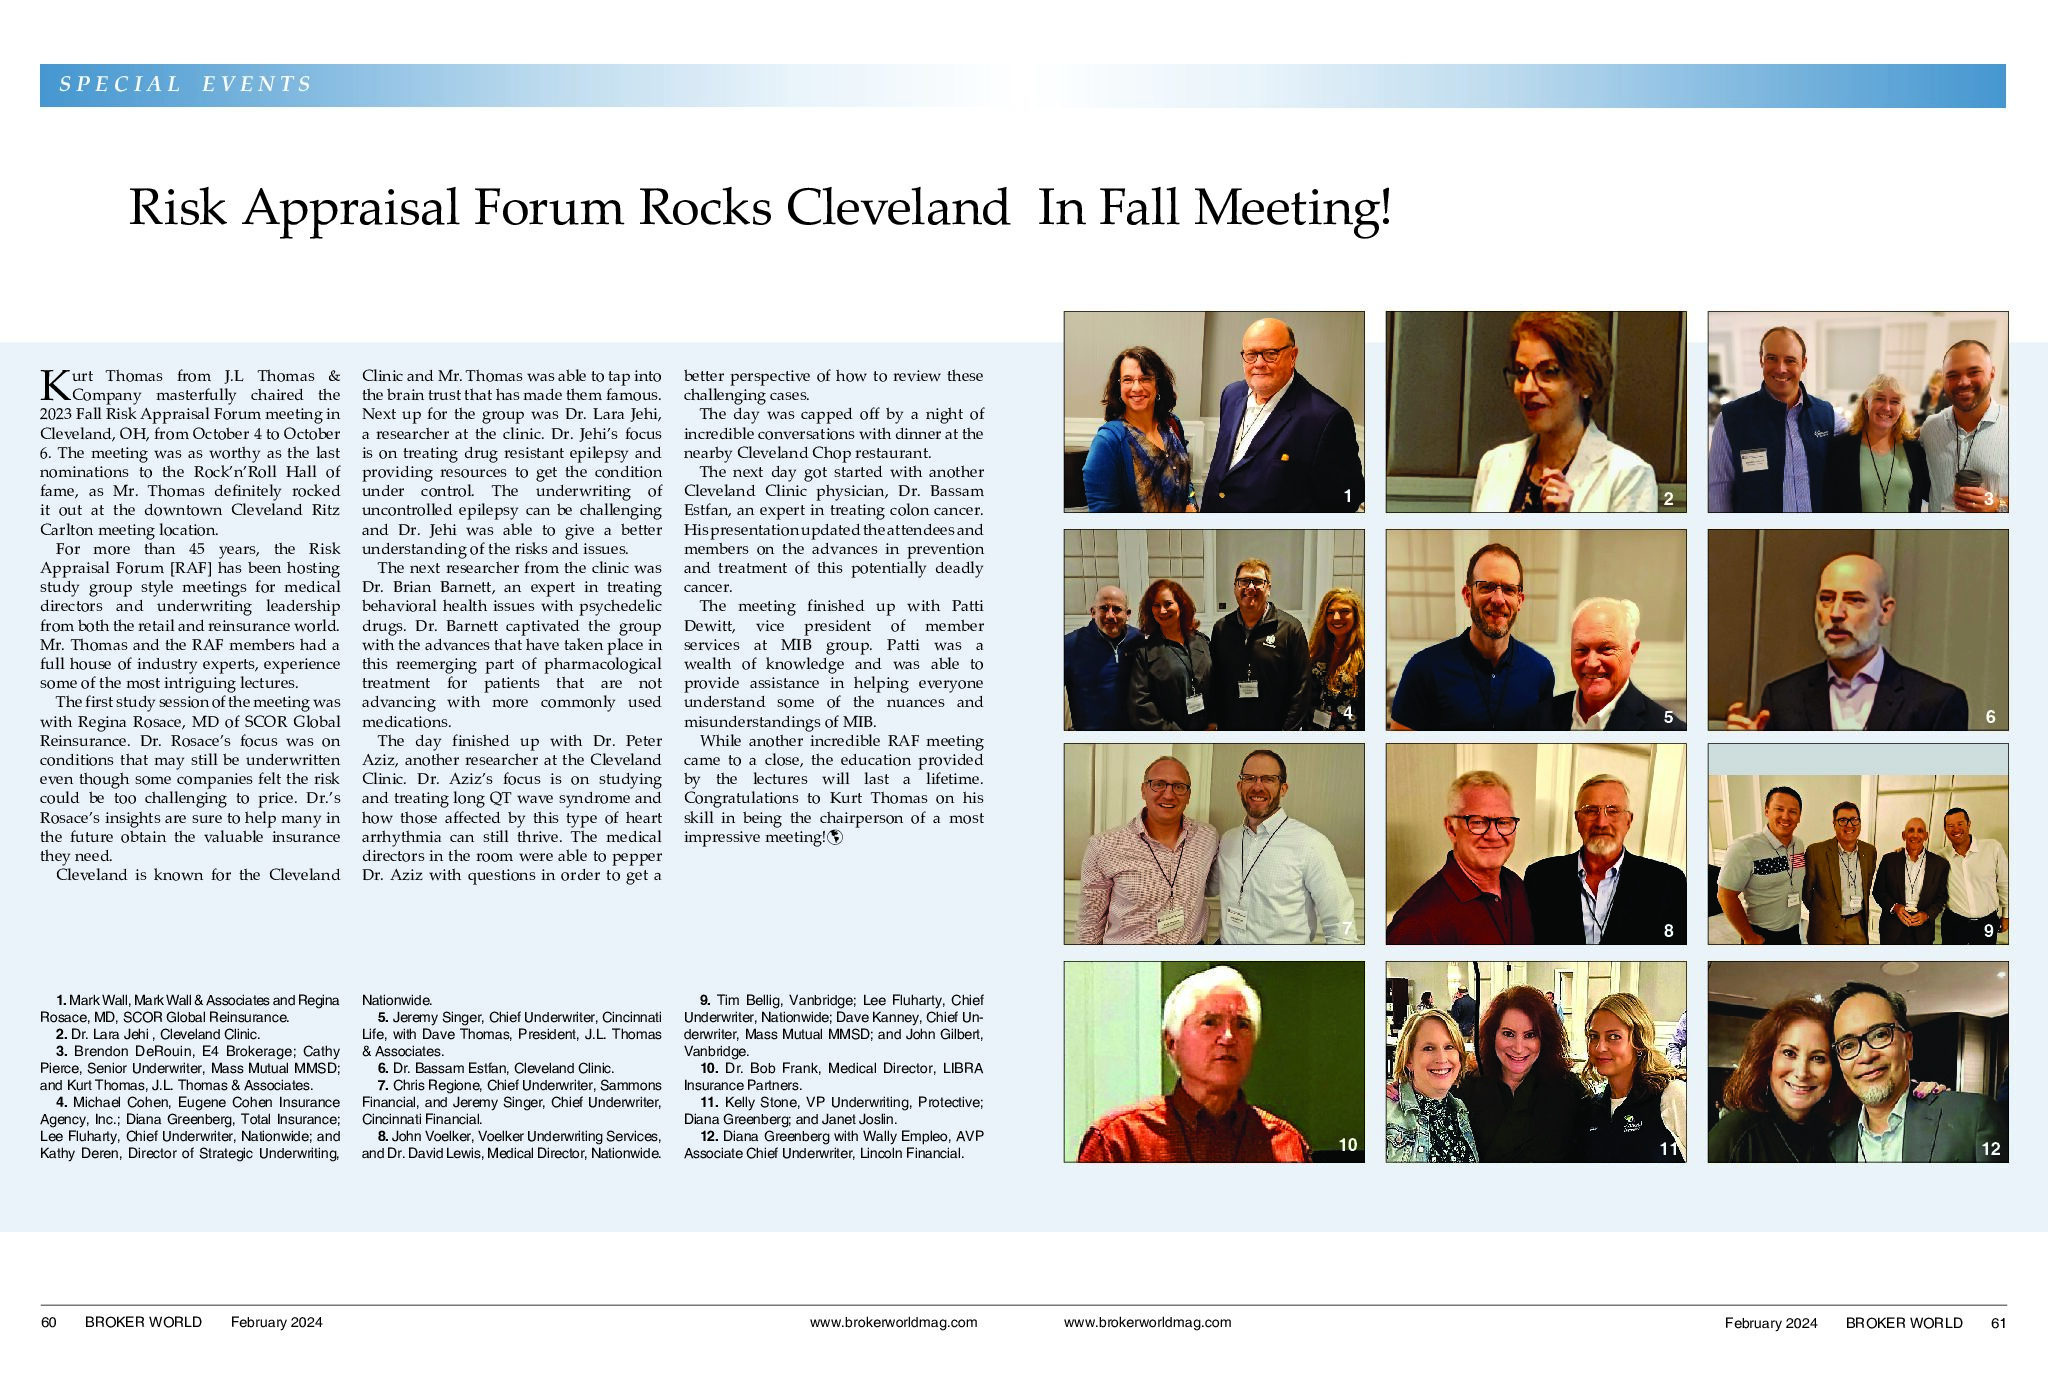 Read More: Risk Appraisal Forum Rocks Cleveland in Fall Meeting!